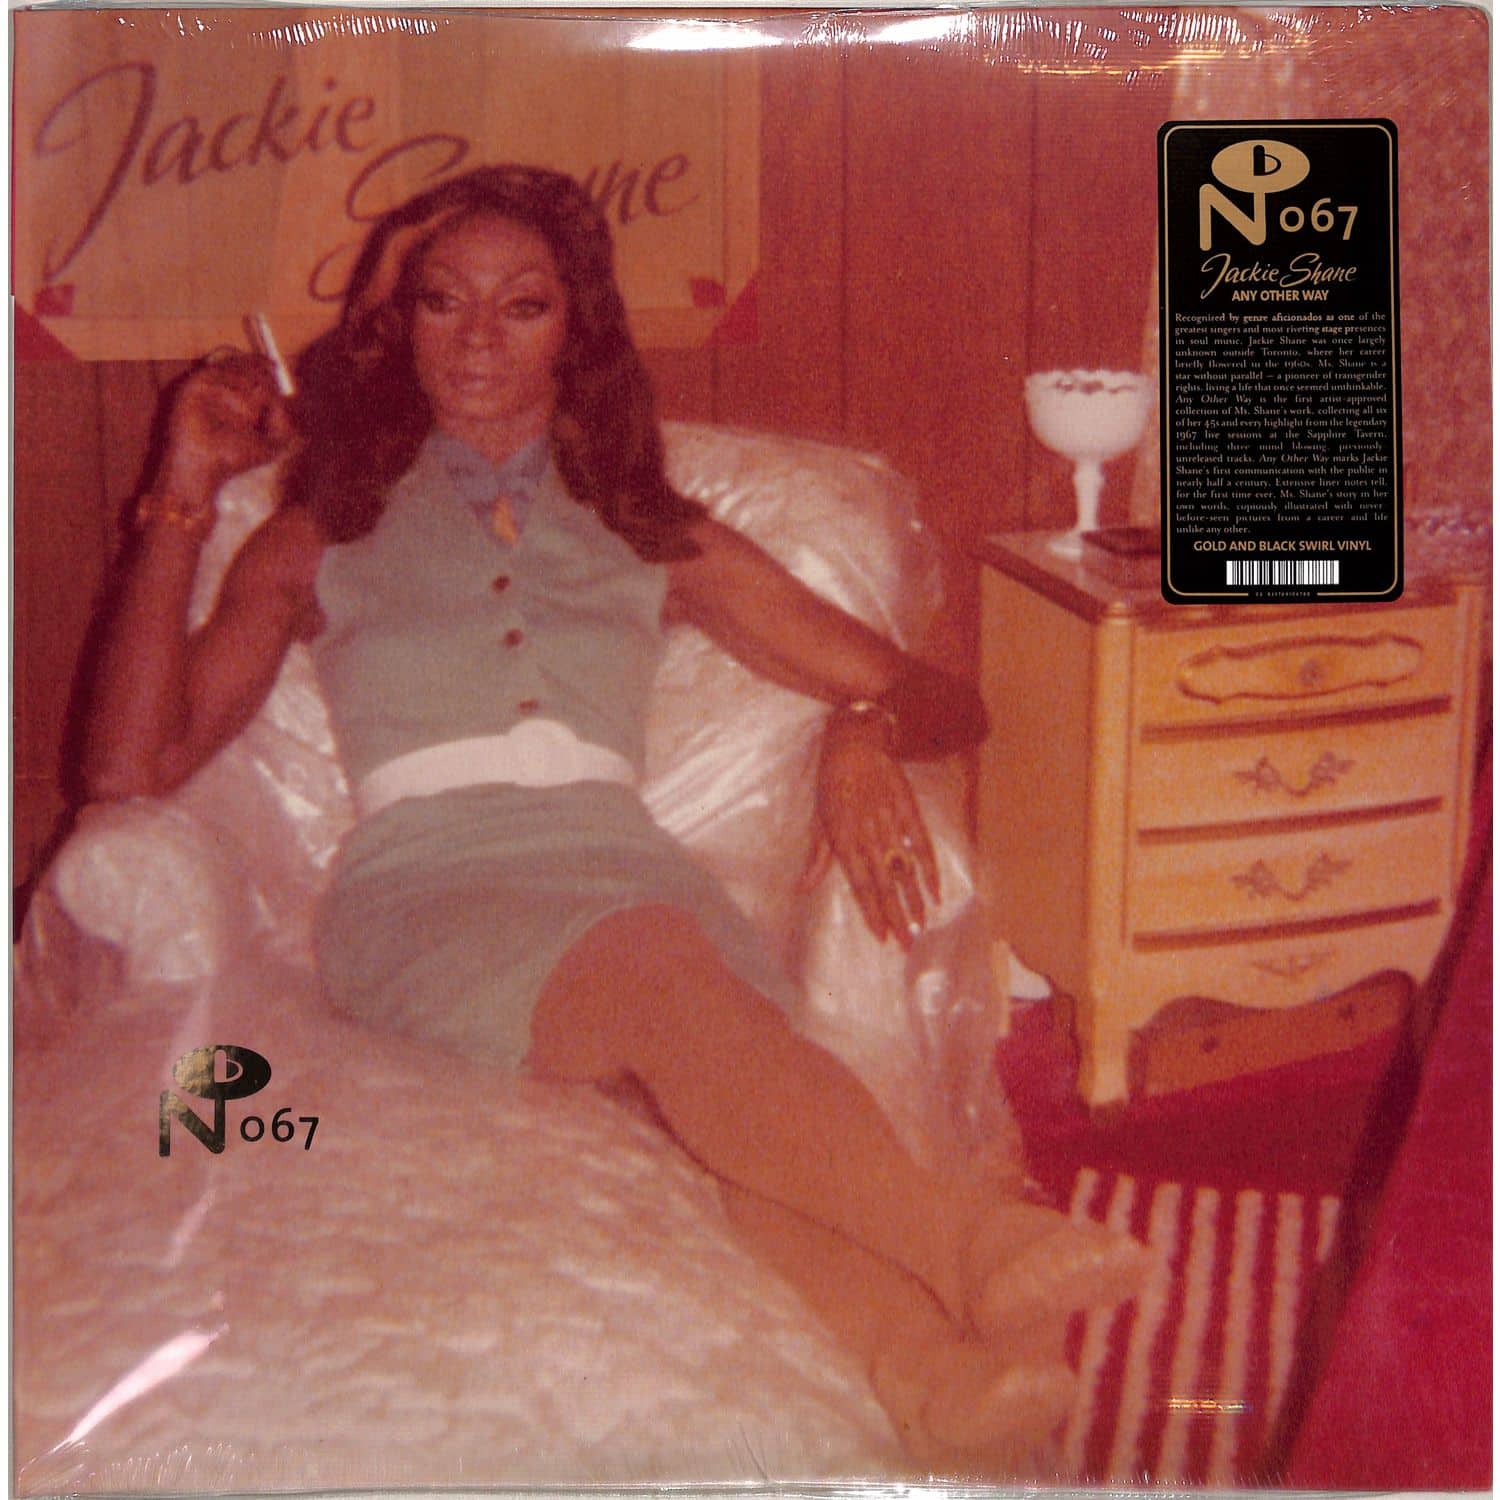 Jackie Shane - ANY OTHER WAY 